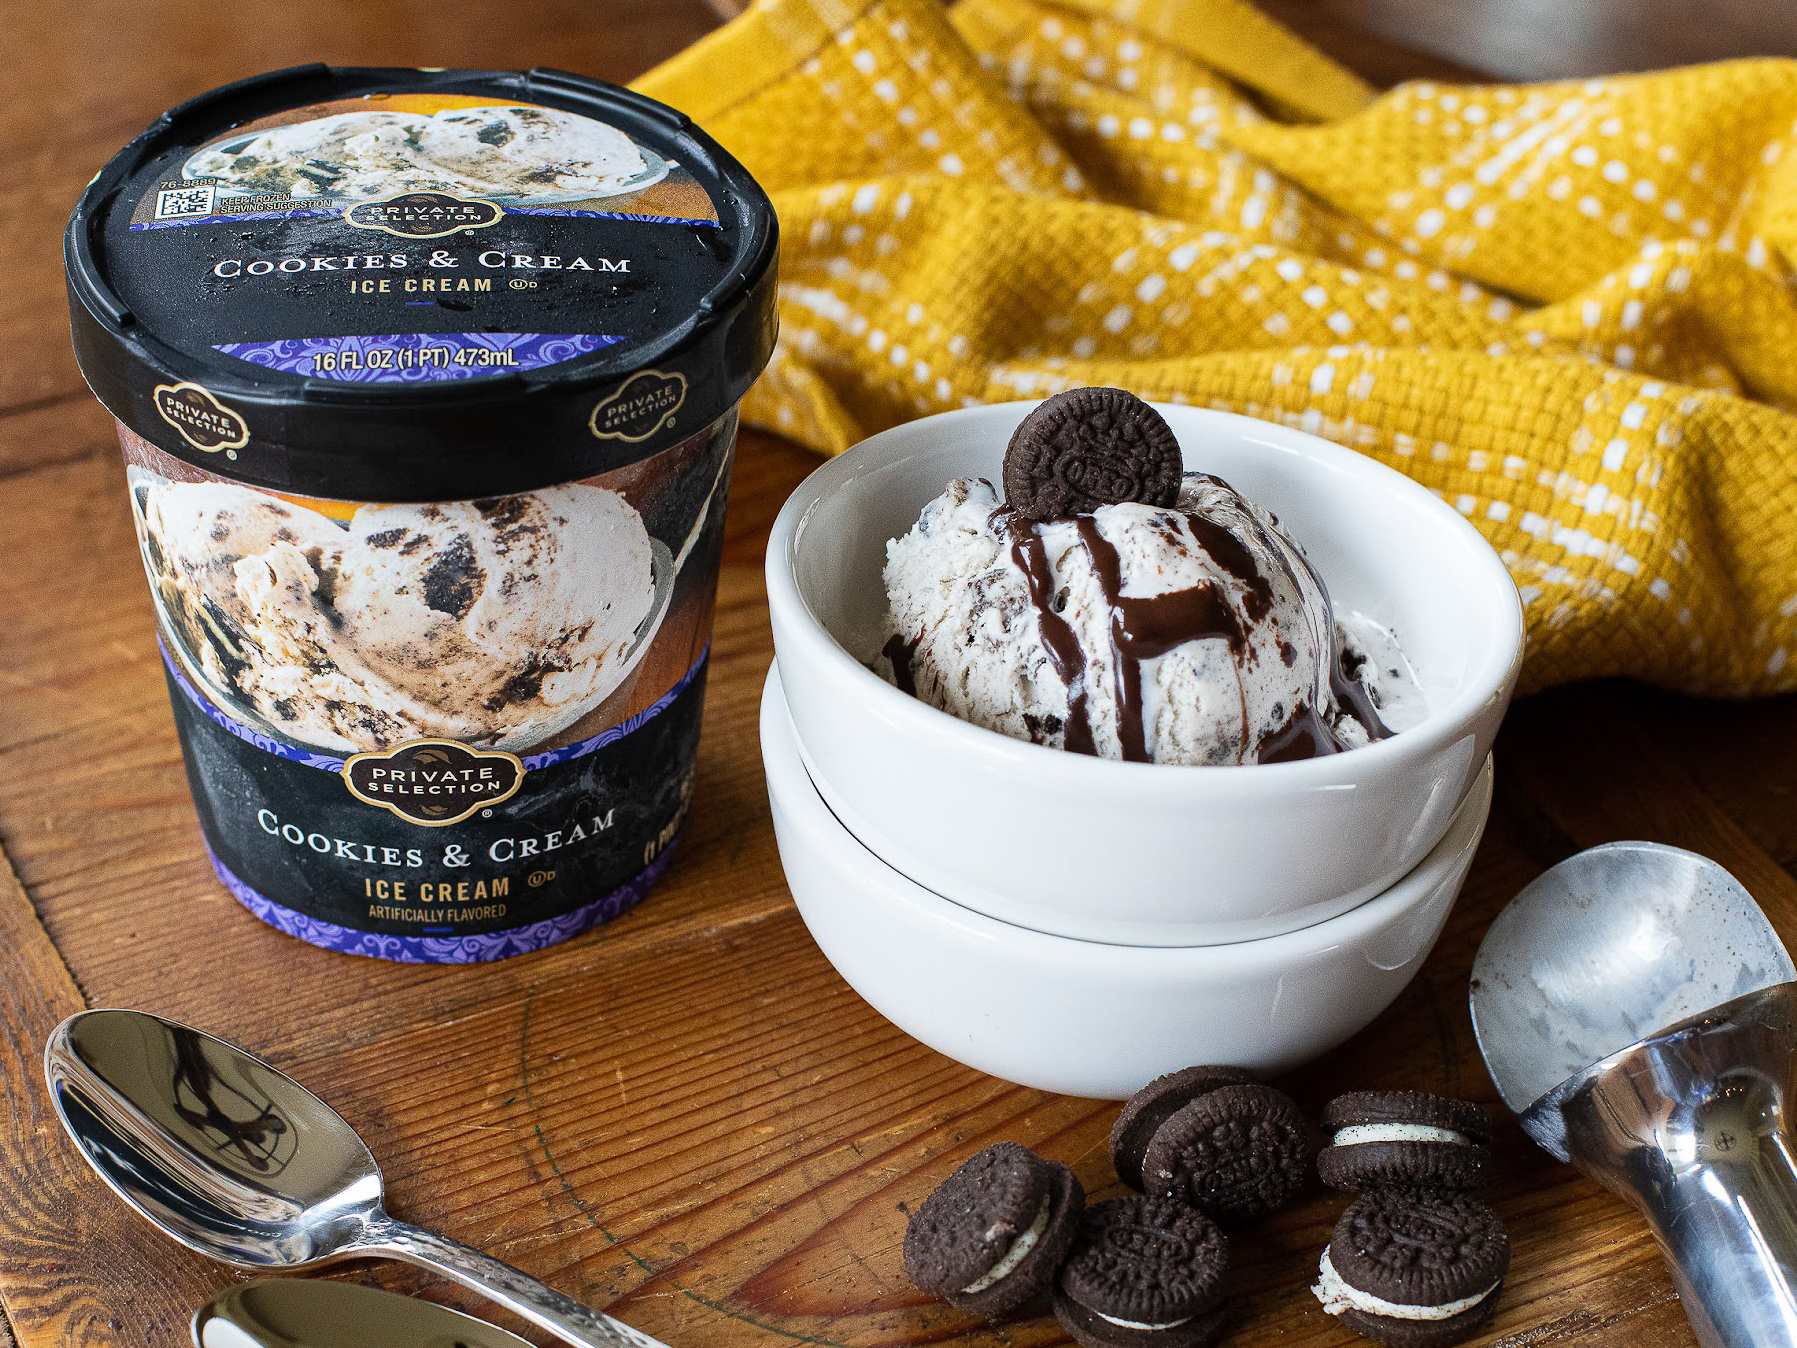 Save On Private Selection Ice Cream This Week At Kroger – Just $1.97 Per Tub!